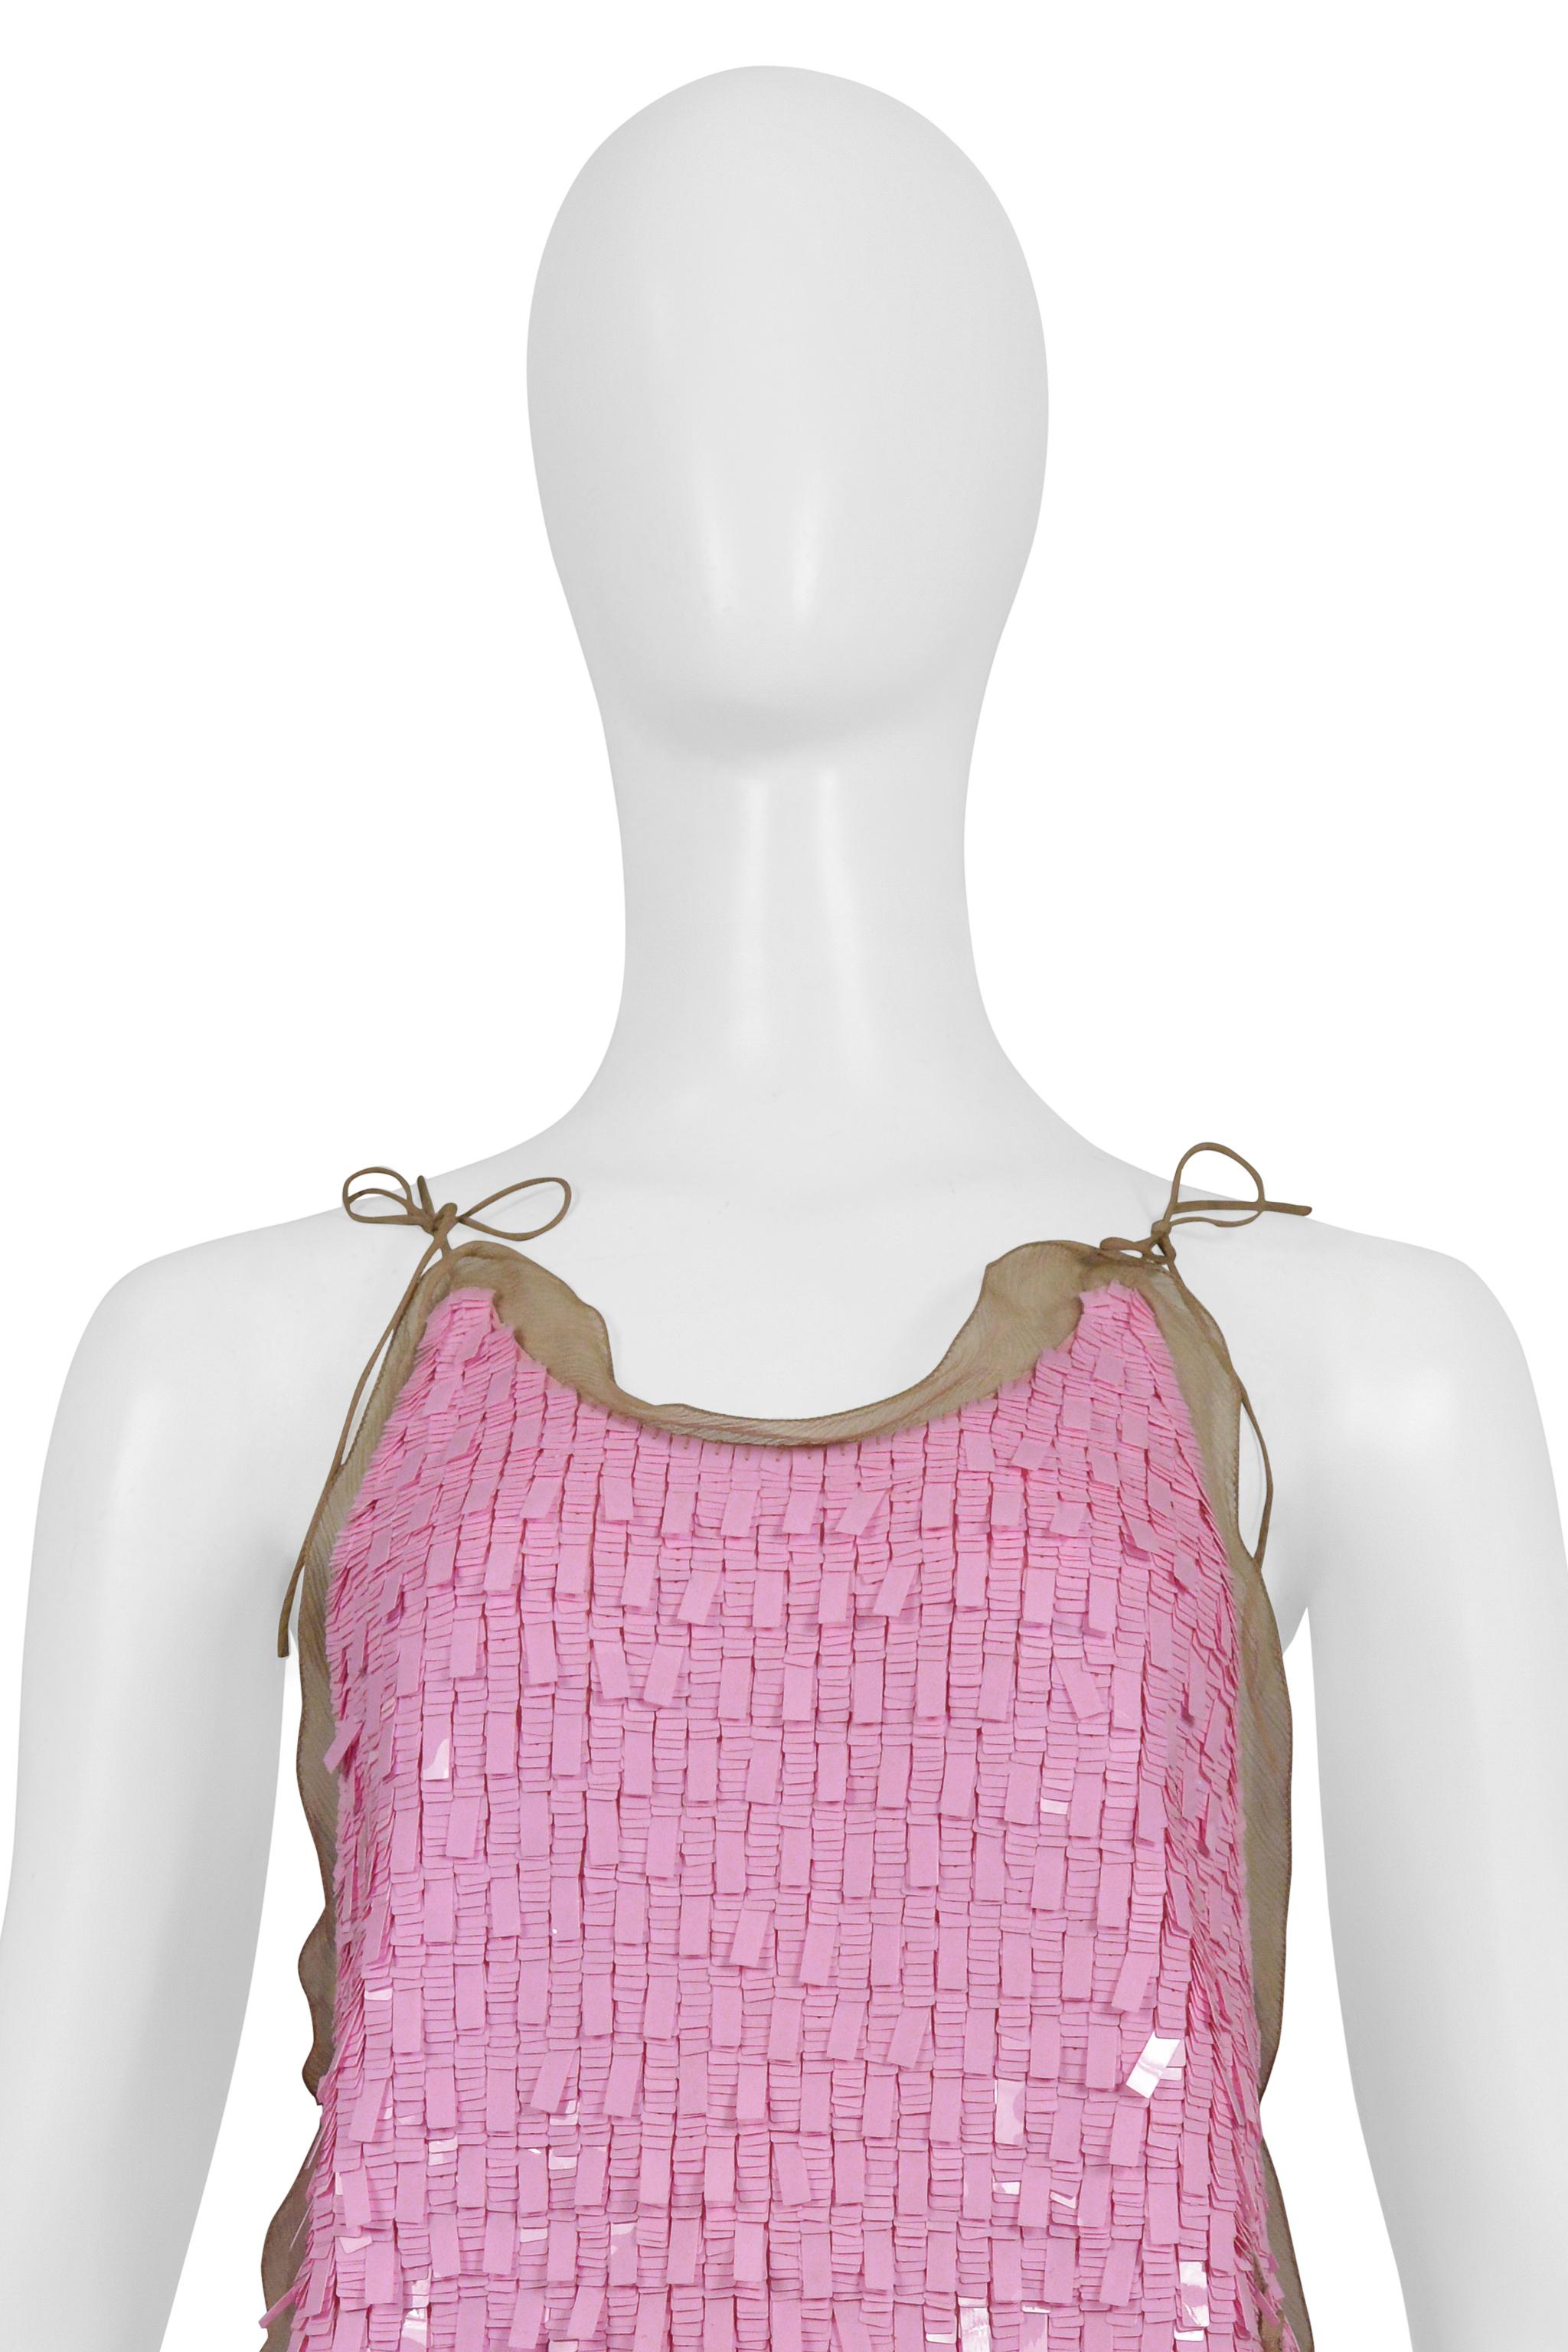 Fendi By Karl Lagerfeld Pink Sequin Pailette Ruffle Top 2000 In Excellent Condition For Sale In Los Angeles, CA